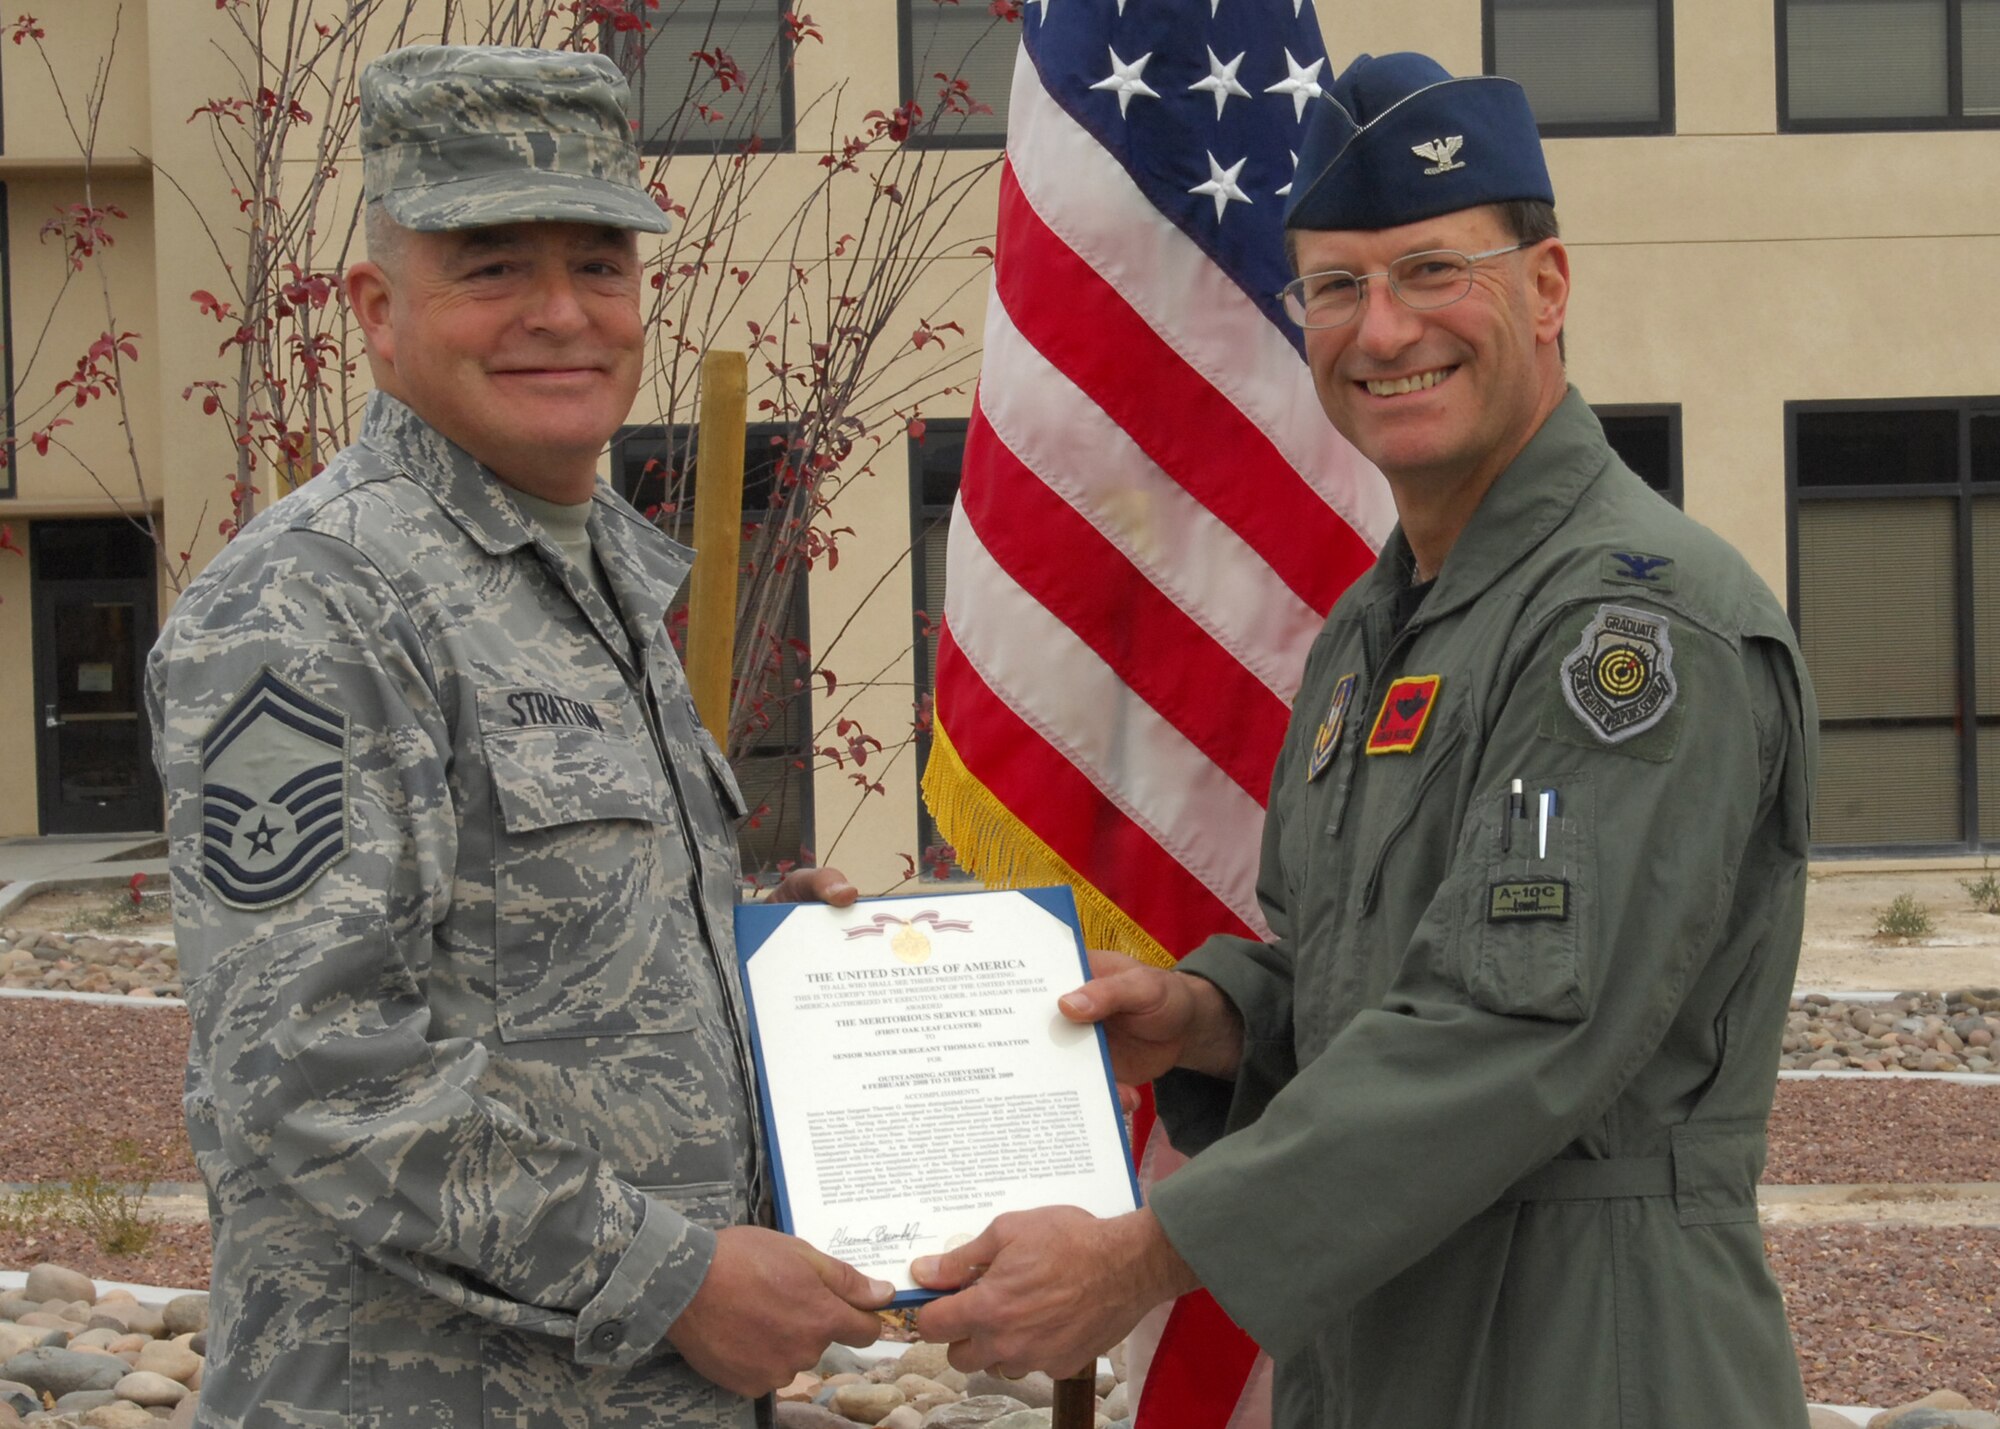 Col. Herman Brunke, 926th Group commander (right), presents Senior Master Sgt. Thomas Stratton, 926th Mission Support Squadron supply management superintendent, with a meritorious service medal during the group's building ribbon cutting ceremony Jan. 8. As the group's building custodian, Sergeant Stratton was instrumental to the $14.5 million renovation project. (U.S. Air Force photo/Staff Sgt. Erin Worley)